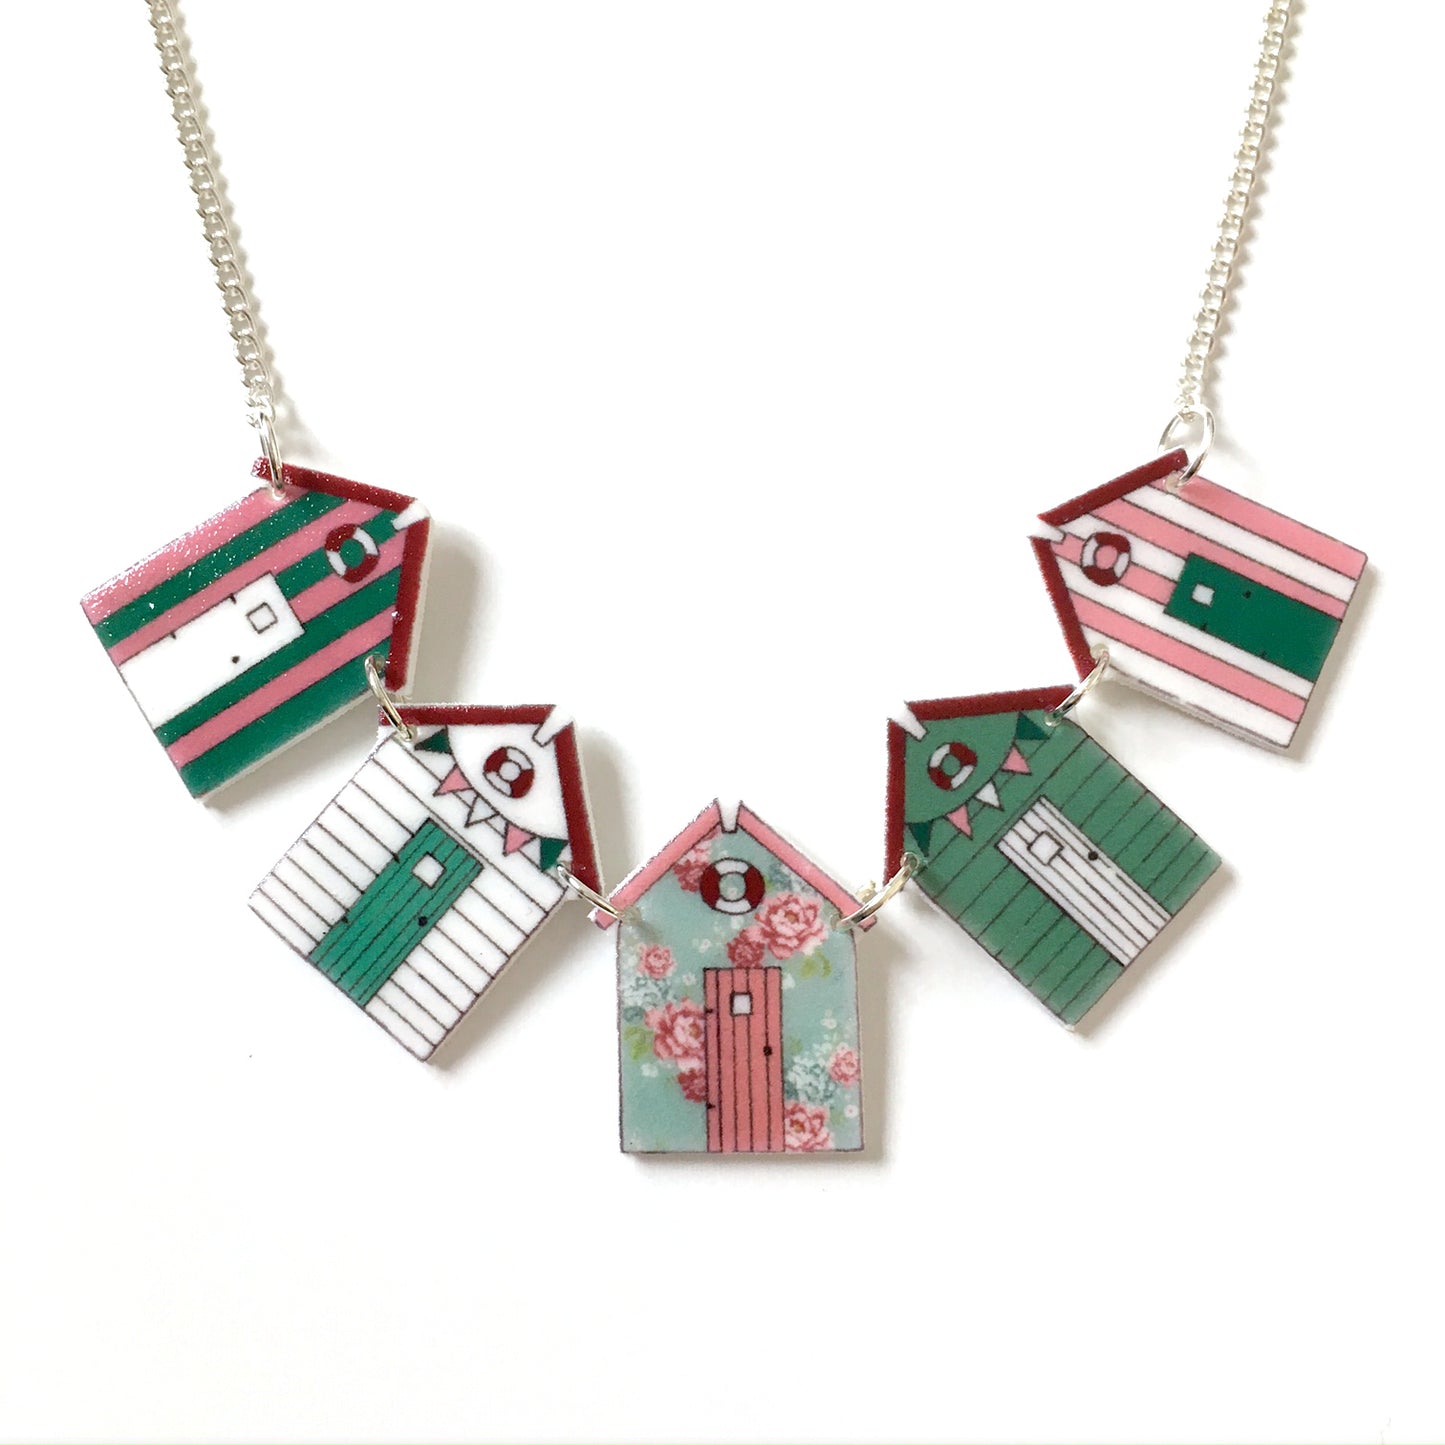 Floral beach hut bunting necklace - Summer jewellery